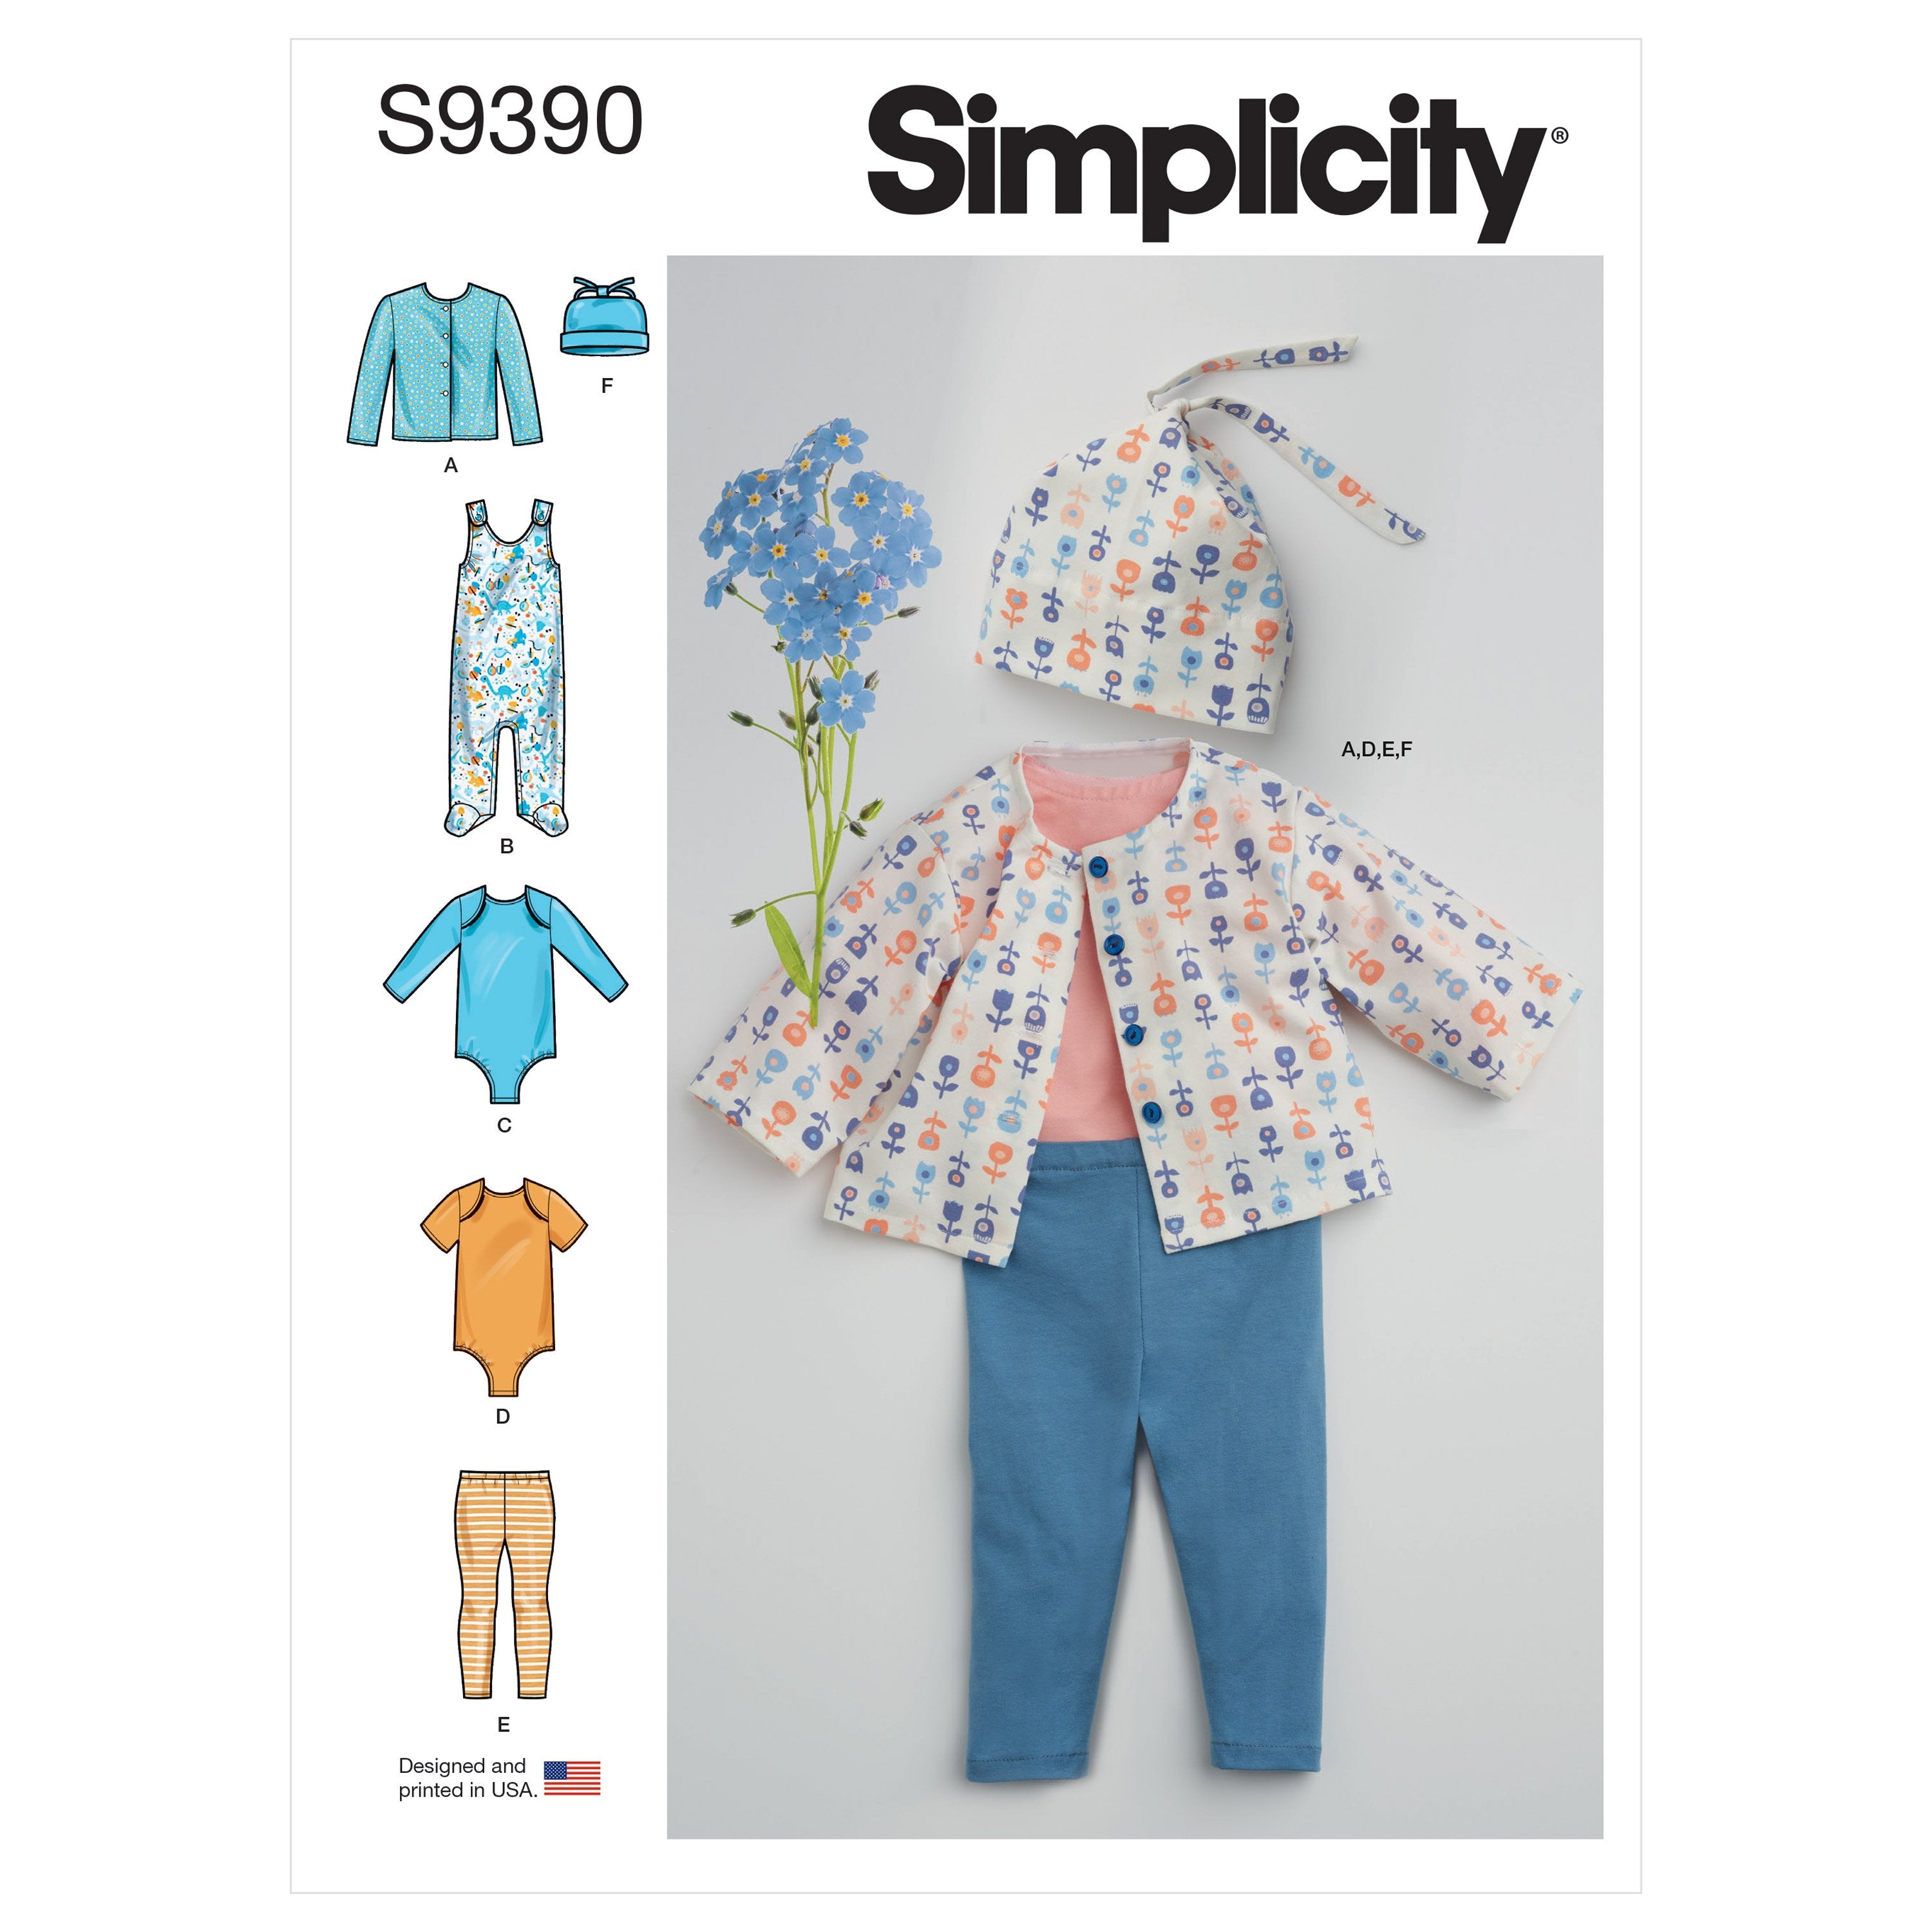 Simplicity Sewing Pattern 9390 Babies' Knit Layette from Jaycotts Sewing Supplies